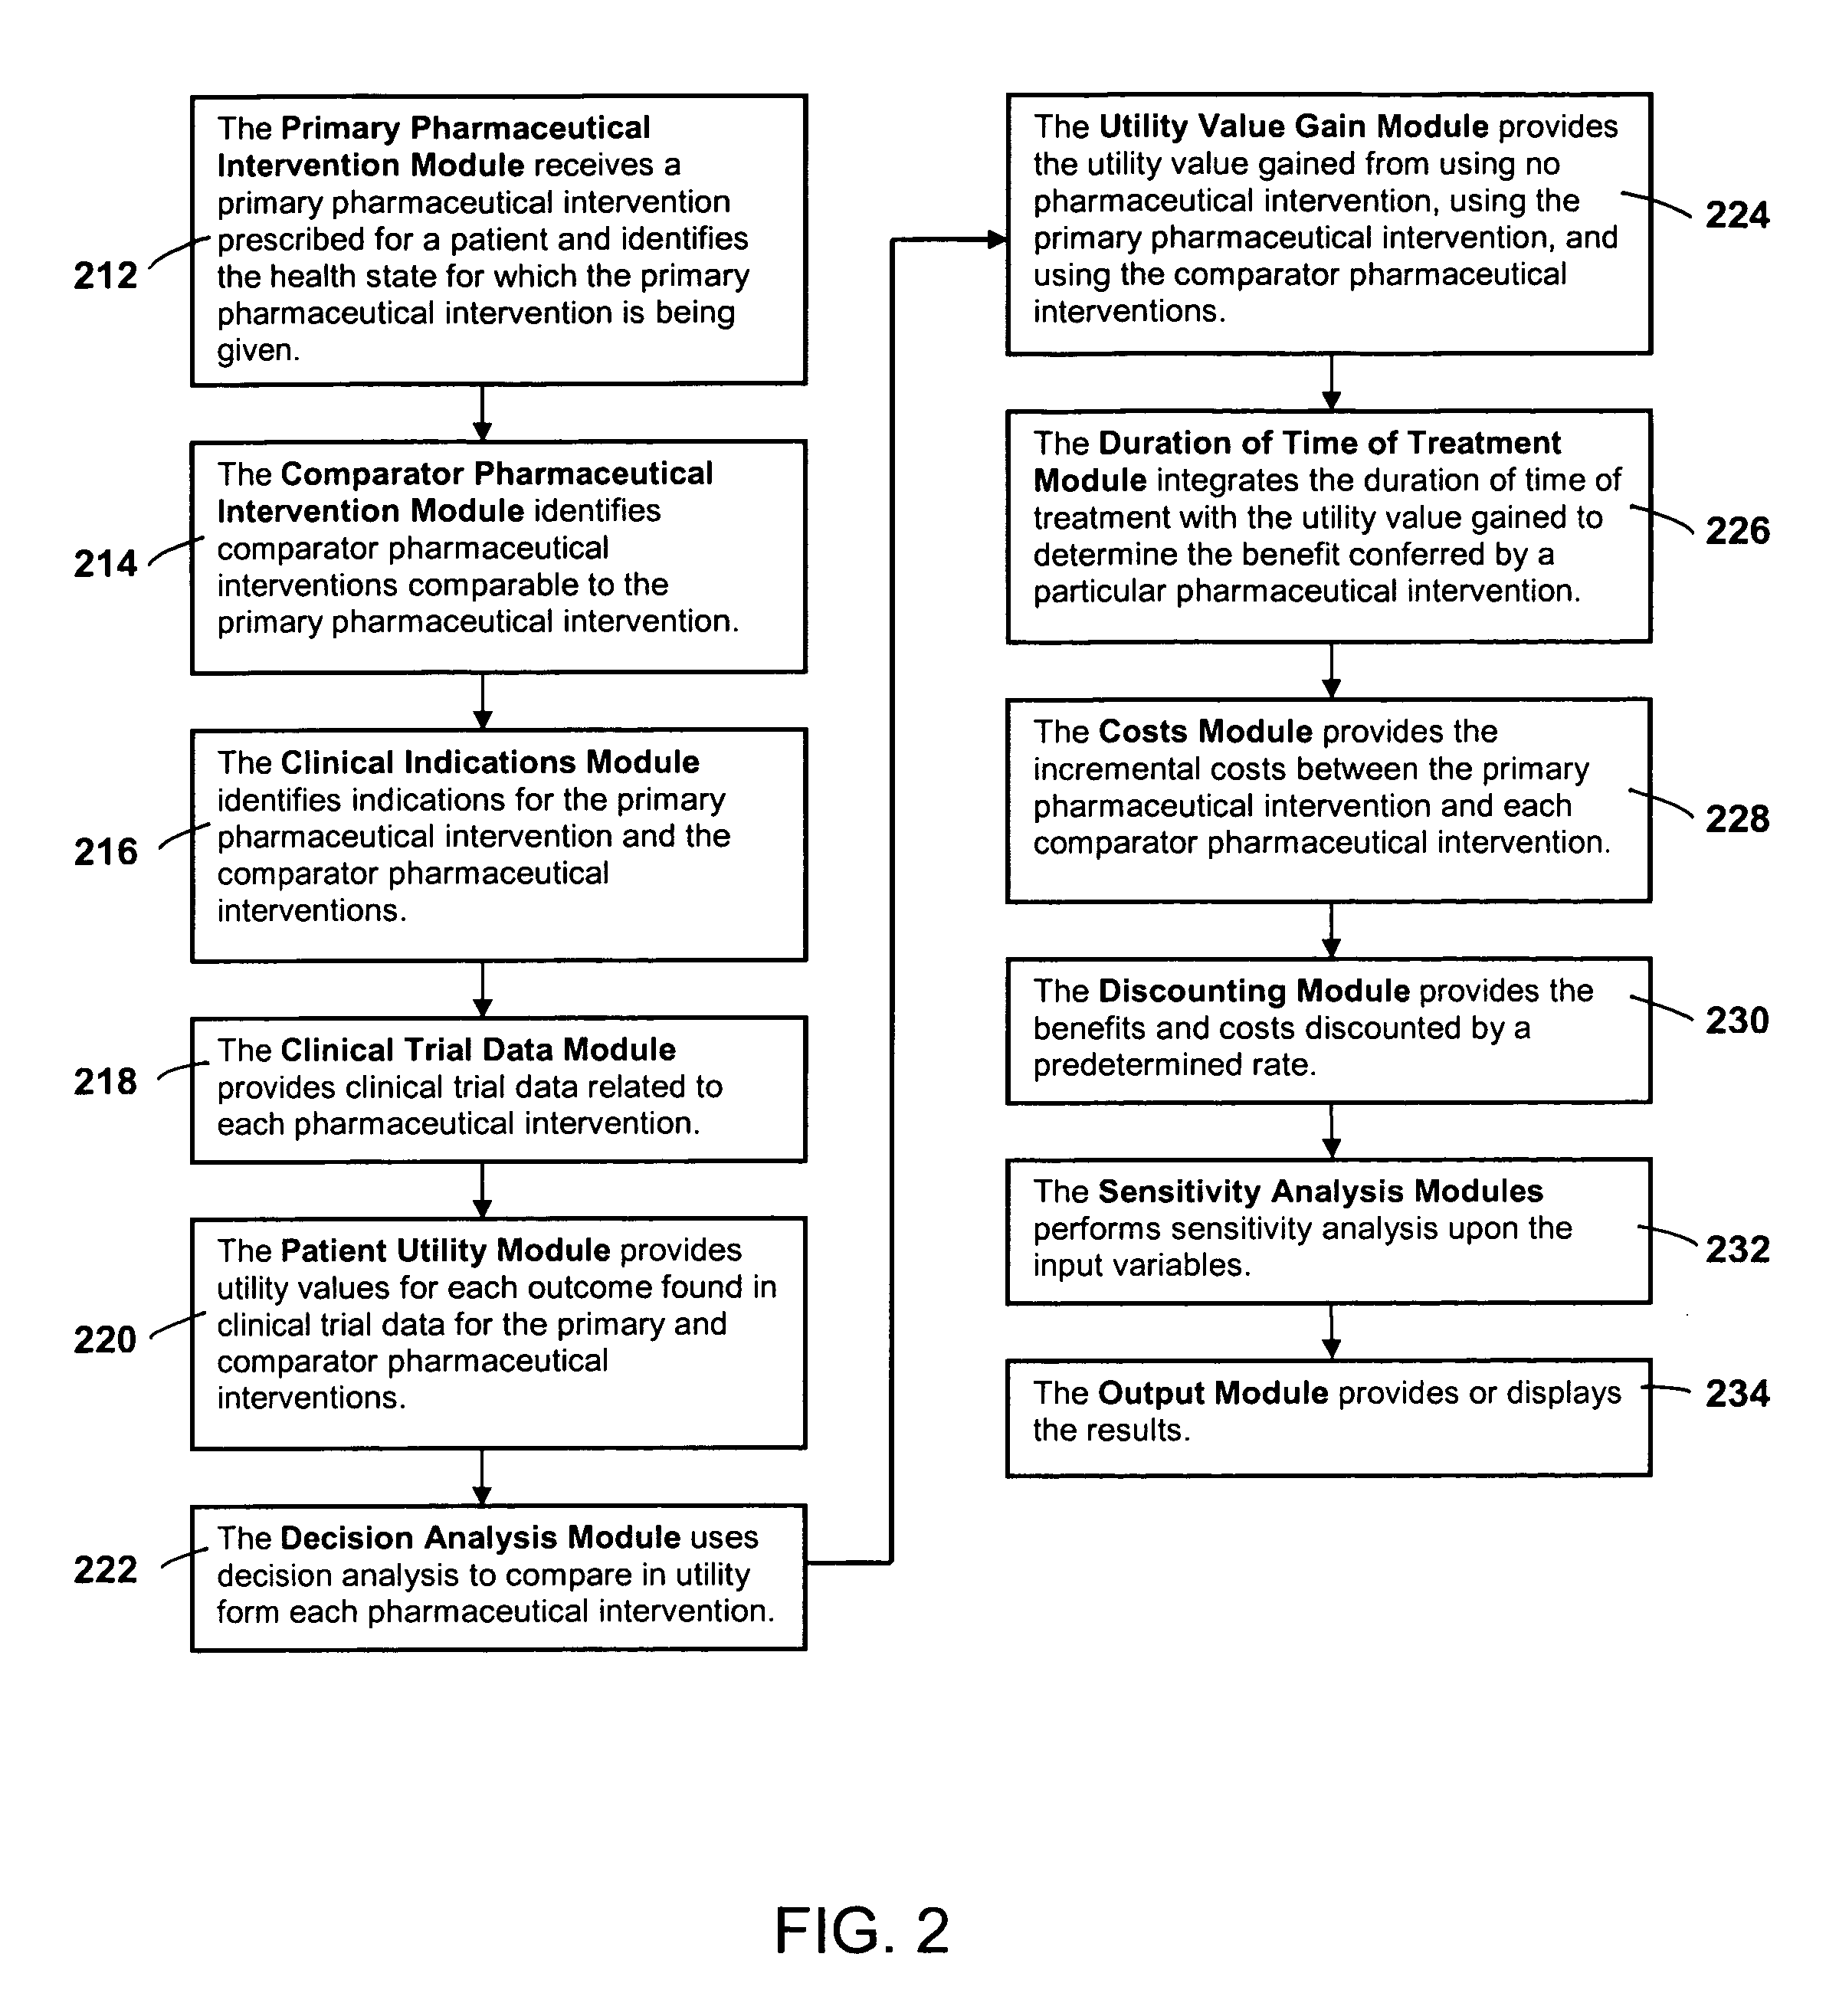 System and method for performing a cost-utility analysis of pharmaceutical interventions